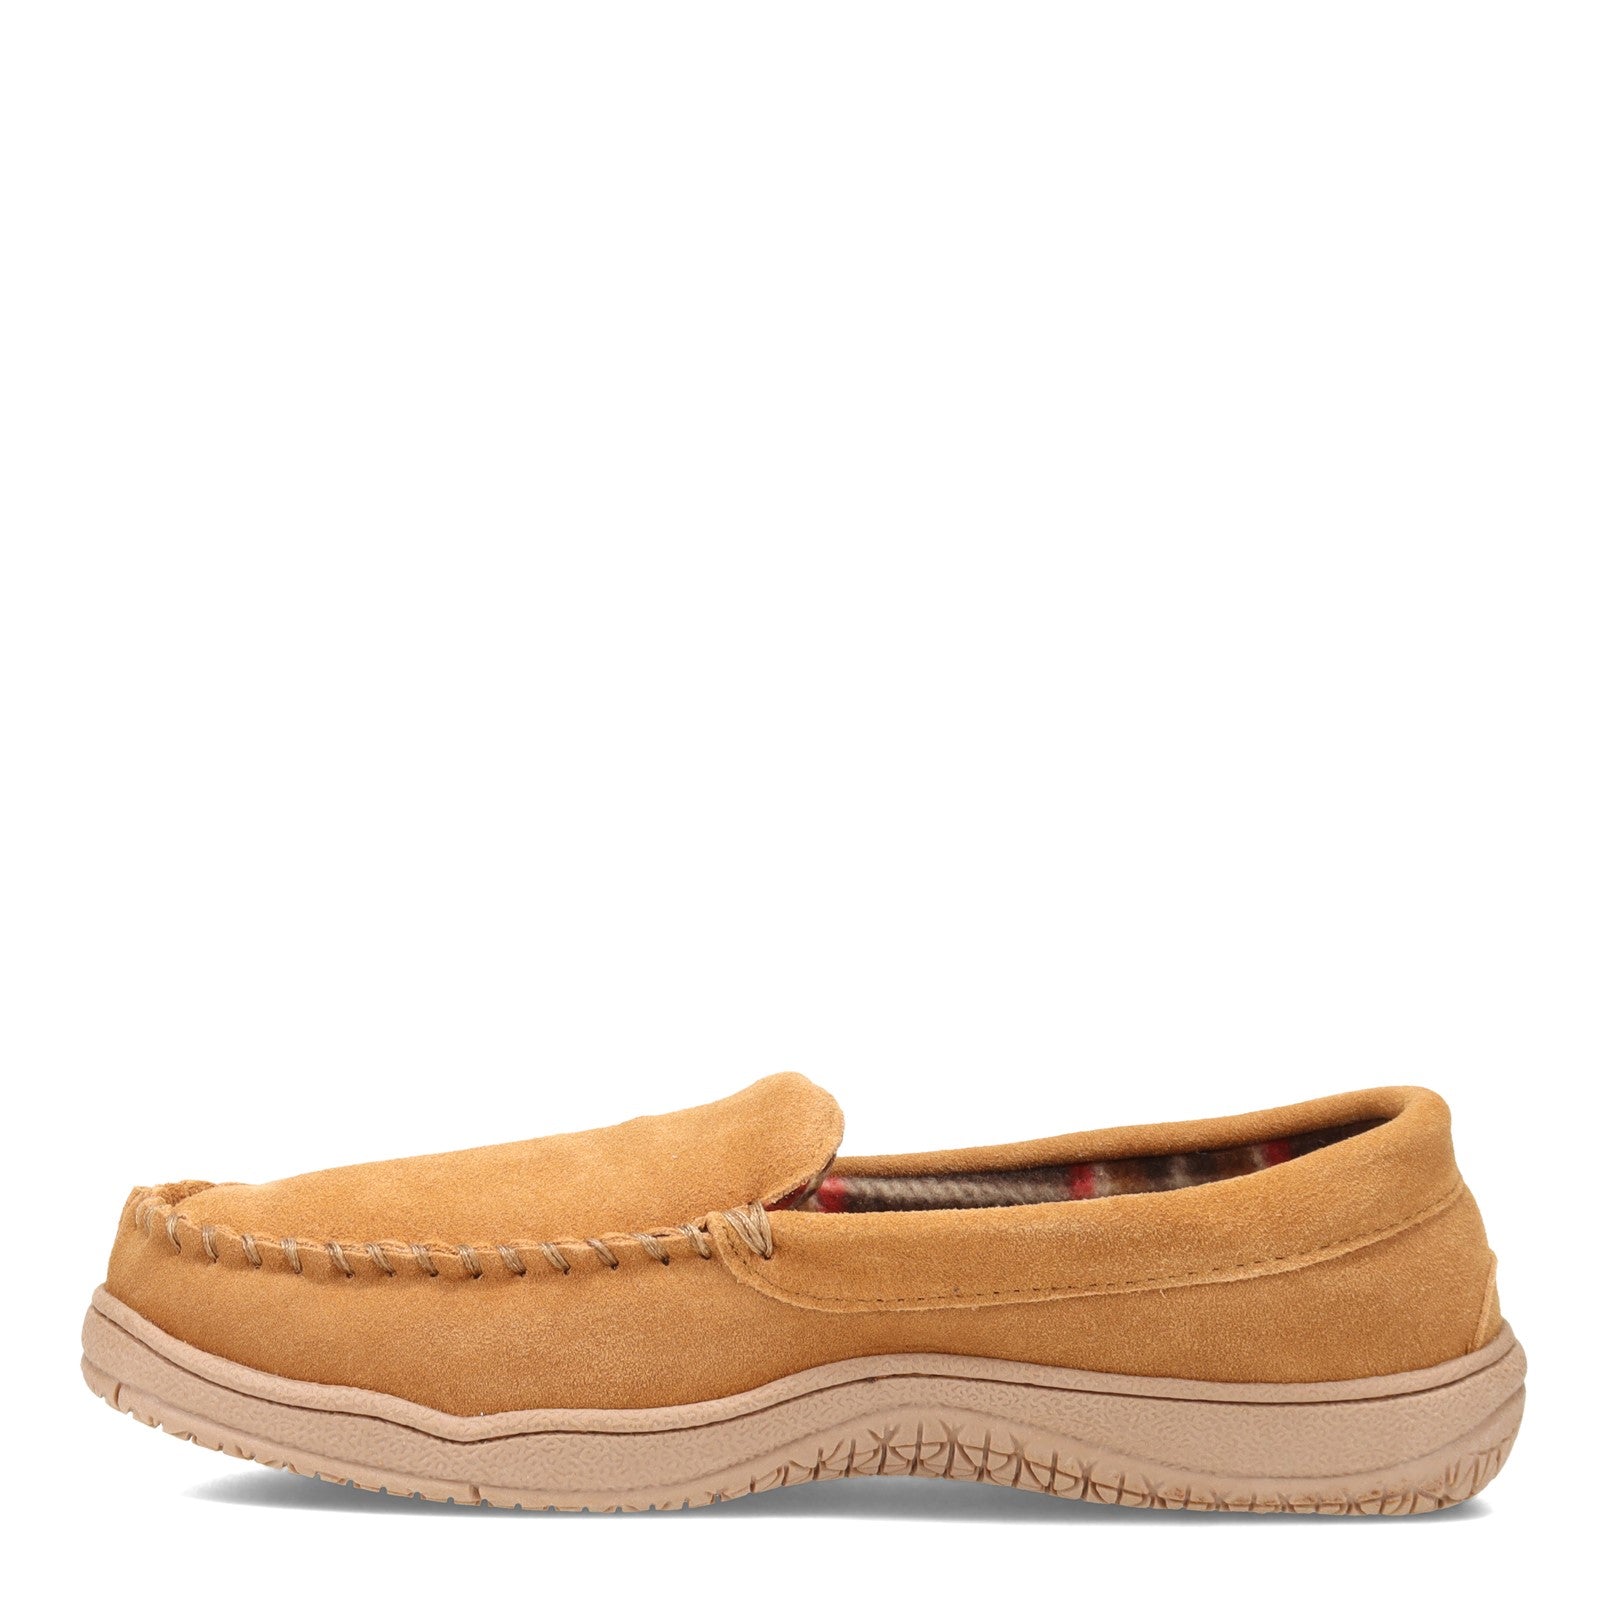 Clarks Suede Moccasin Slippers with Sweater Trim - QVC.com